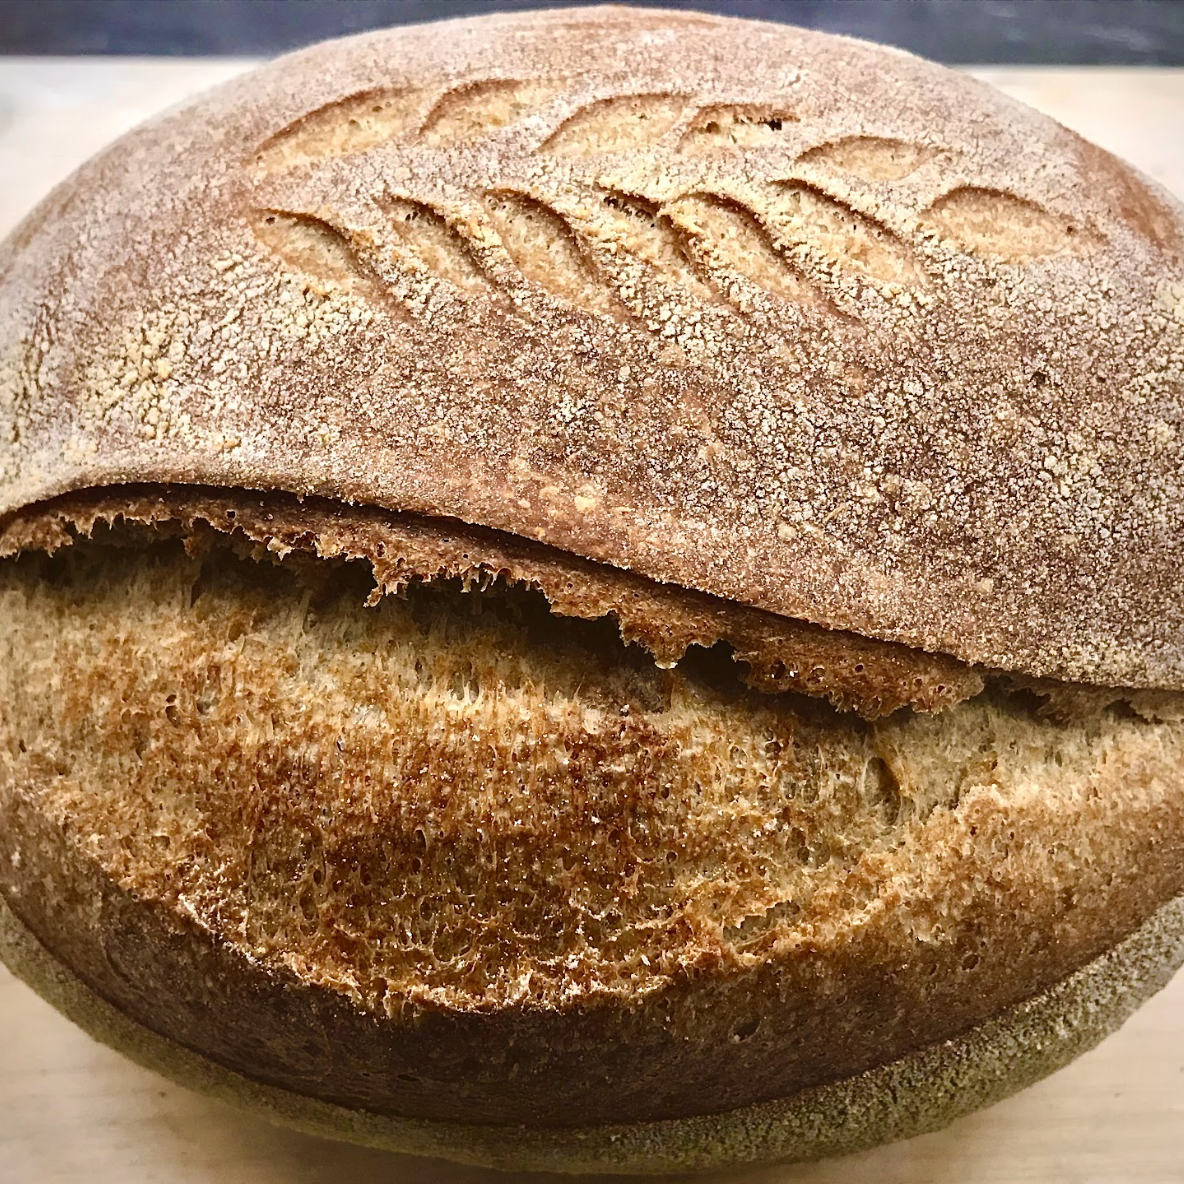 <h4>Bread</h4>
Every day Breads are Whole Wheat Loaf, Anadama Loaf, Multigrain Loaf, Country Sourdough Boule, Pain de Mie Loaf & Baguettes. 
Bread special is Seeded Sourdough, Potato Herb, Chili Crisp Focaccia, Cherry Rye